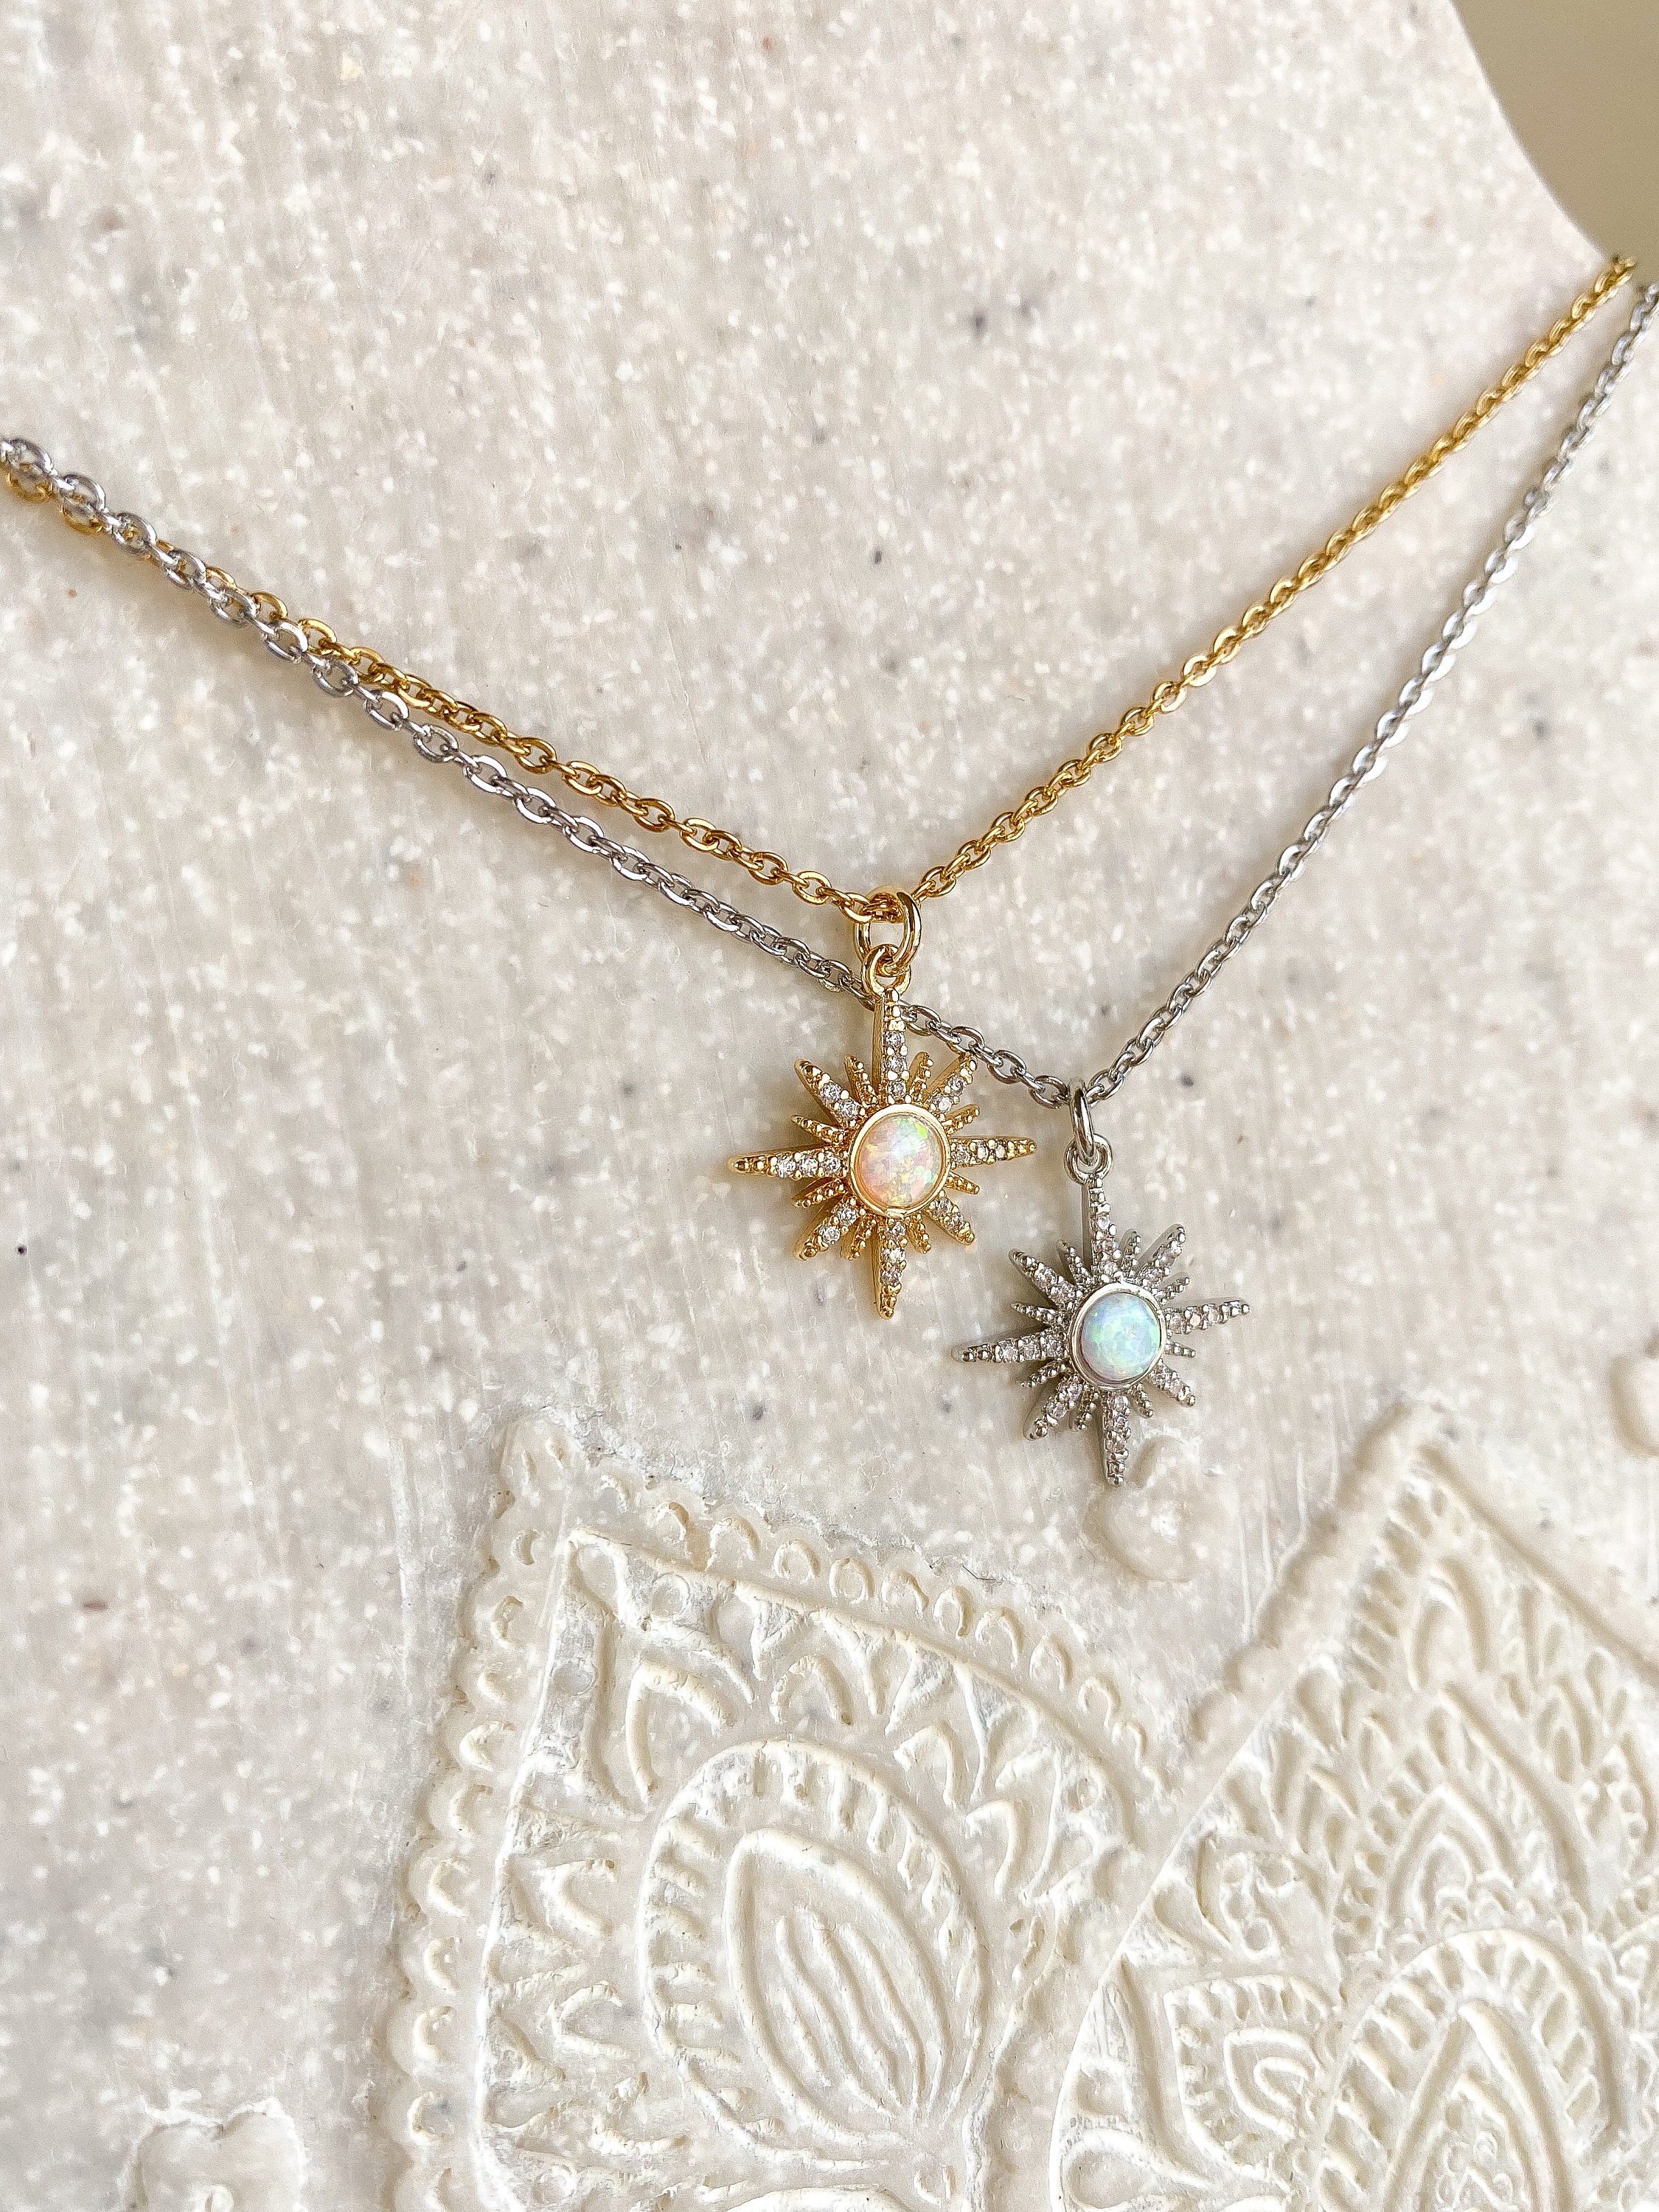 Opal CZ Star Pendant, Gold Filled Star Burst Charms Dainty Celestial Jewelry  Making, Charm for Necklace Bracelet Earring Component, CP1700 -  BeadsCreation4u